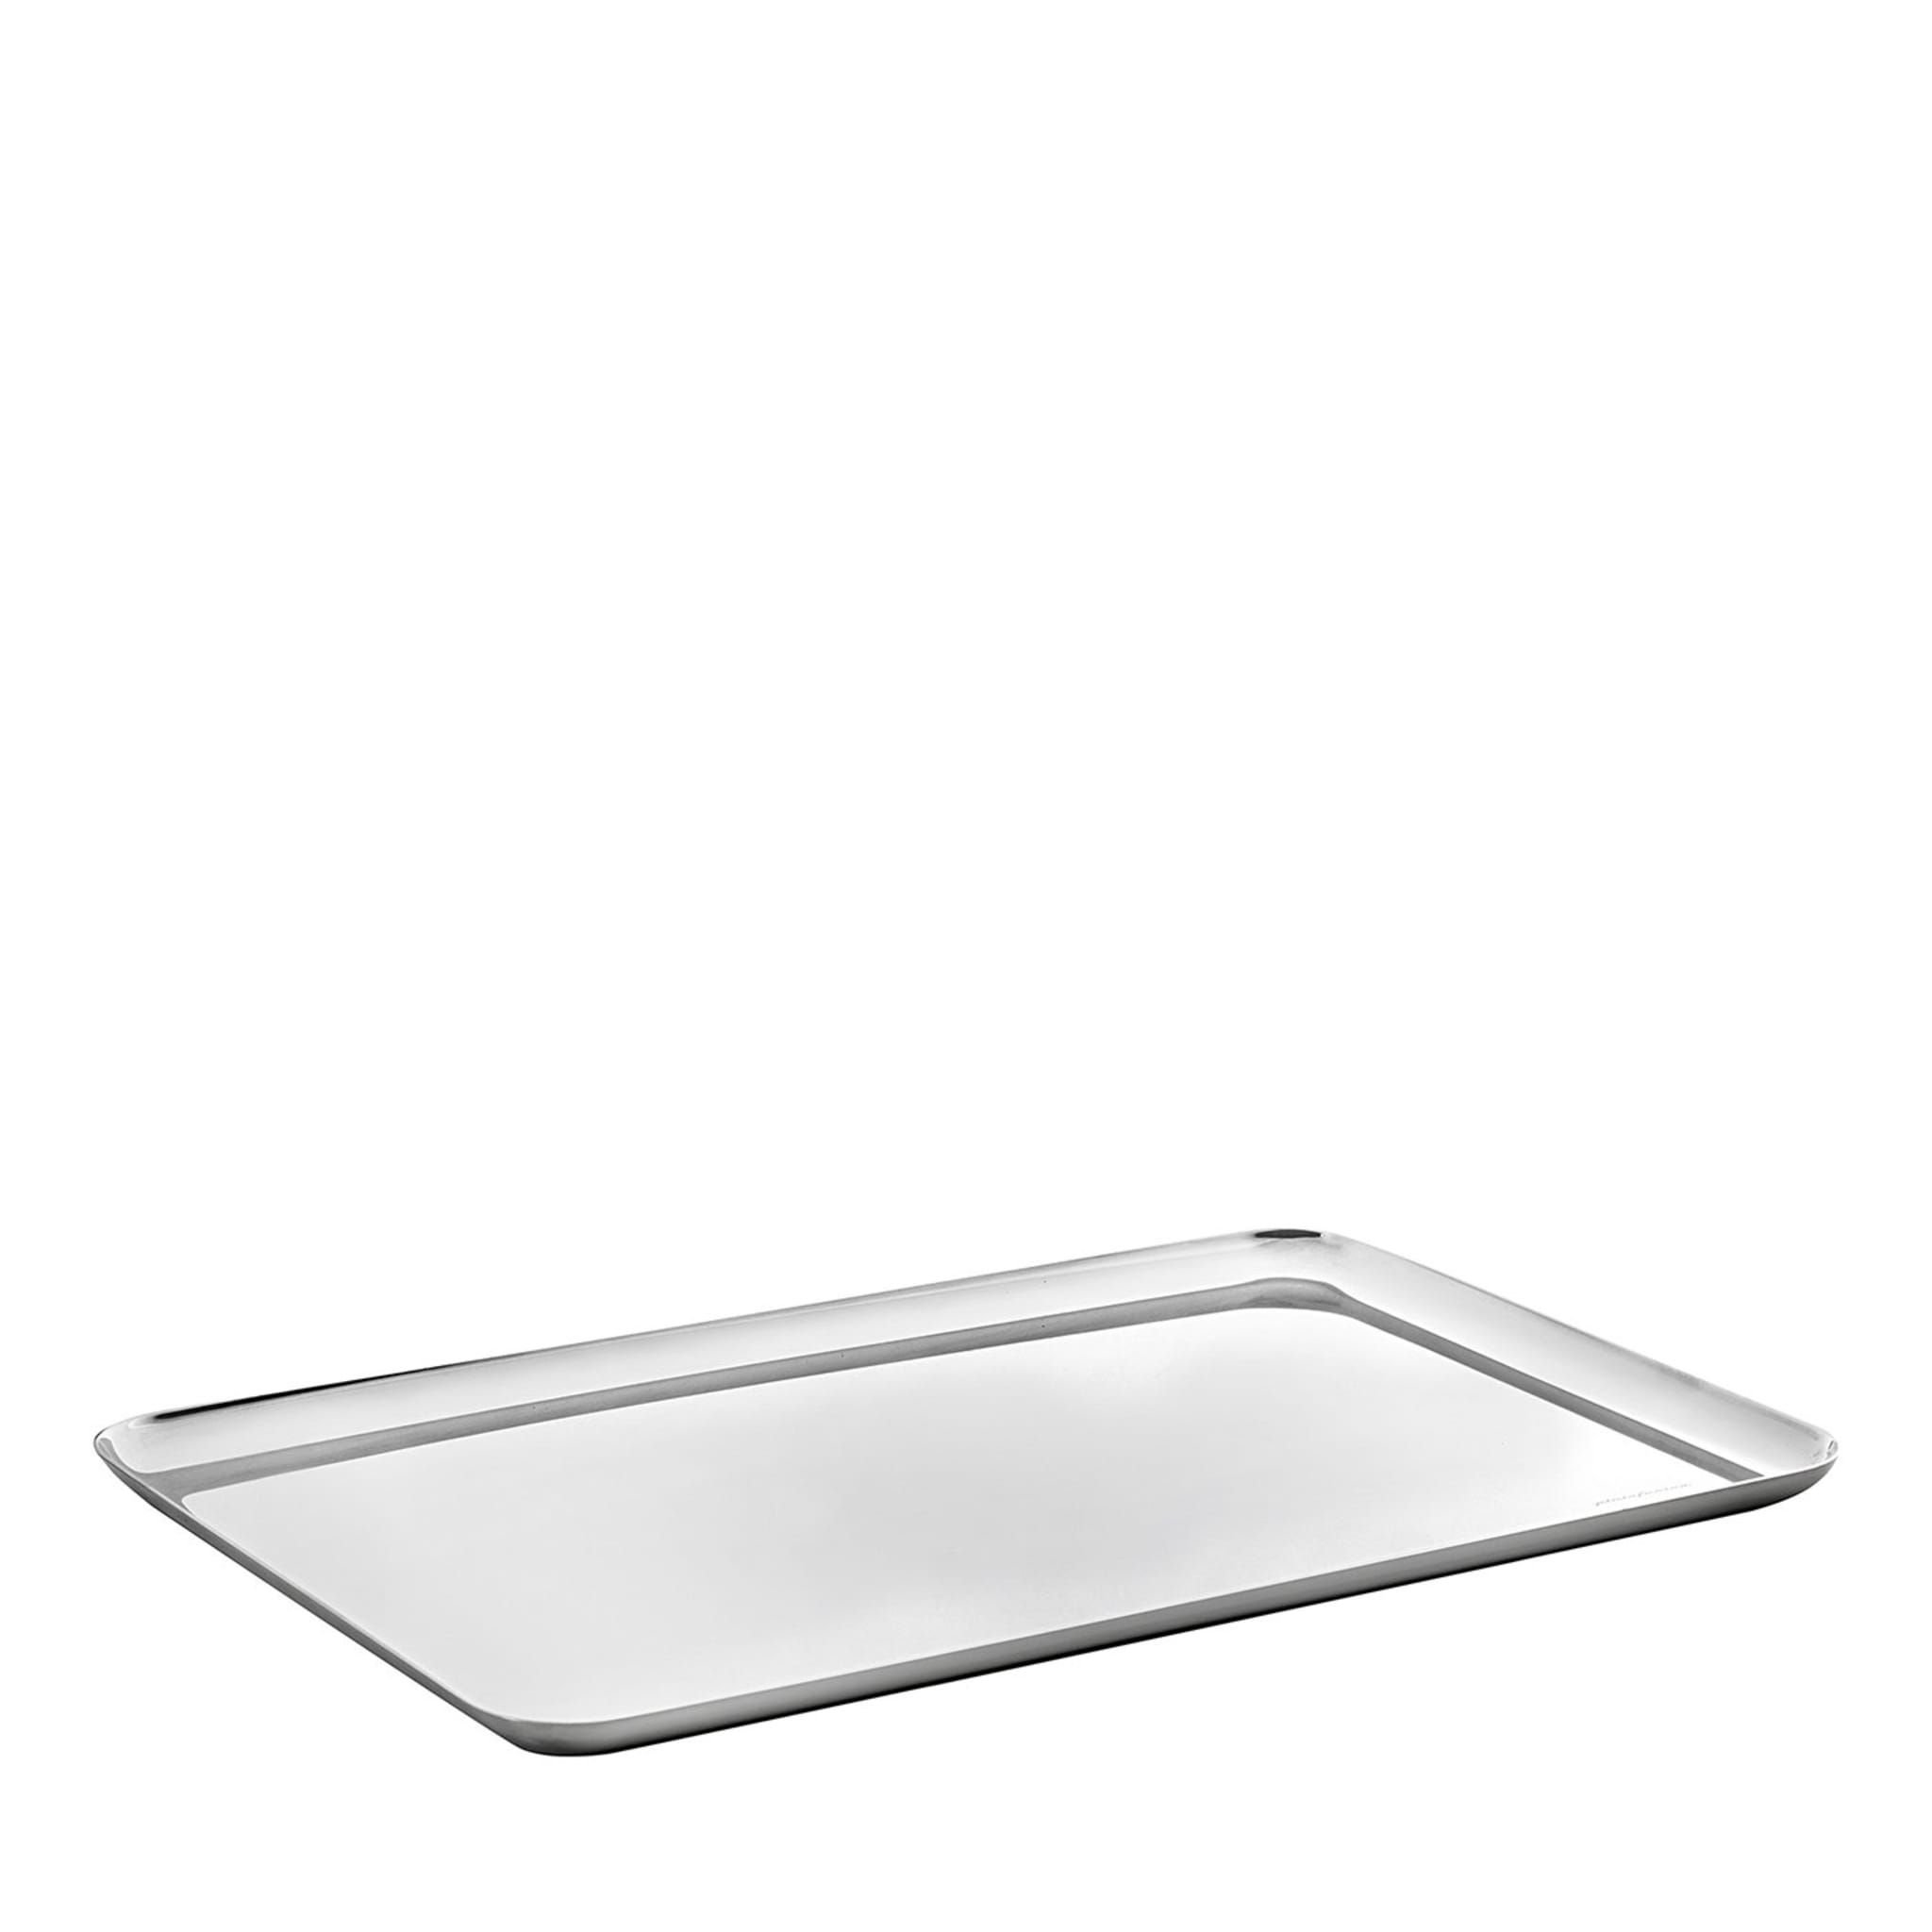 Stile Large Stainless Steel Tray - Main view